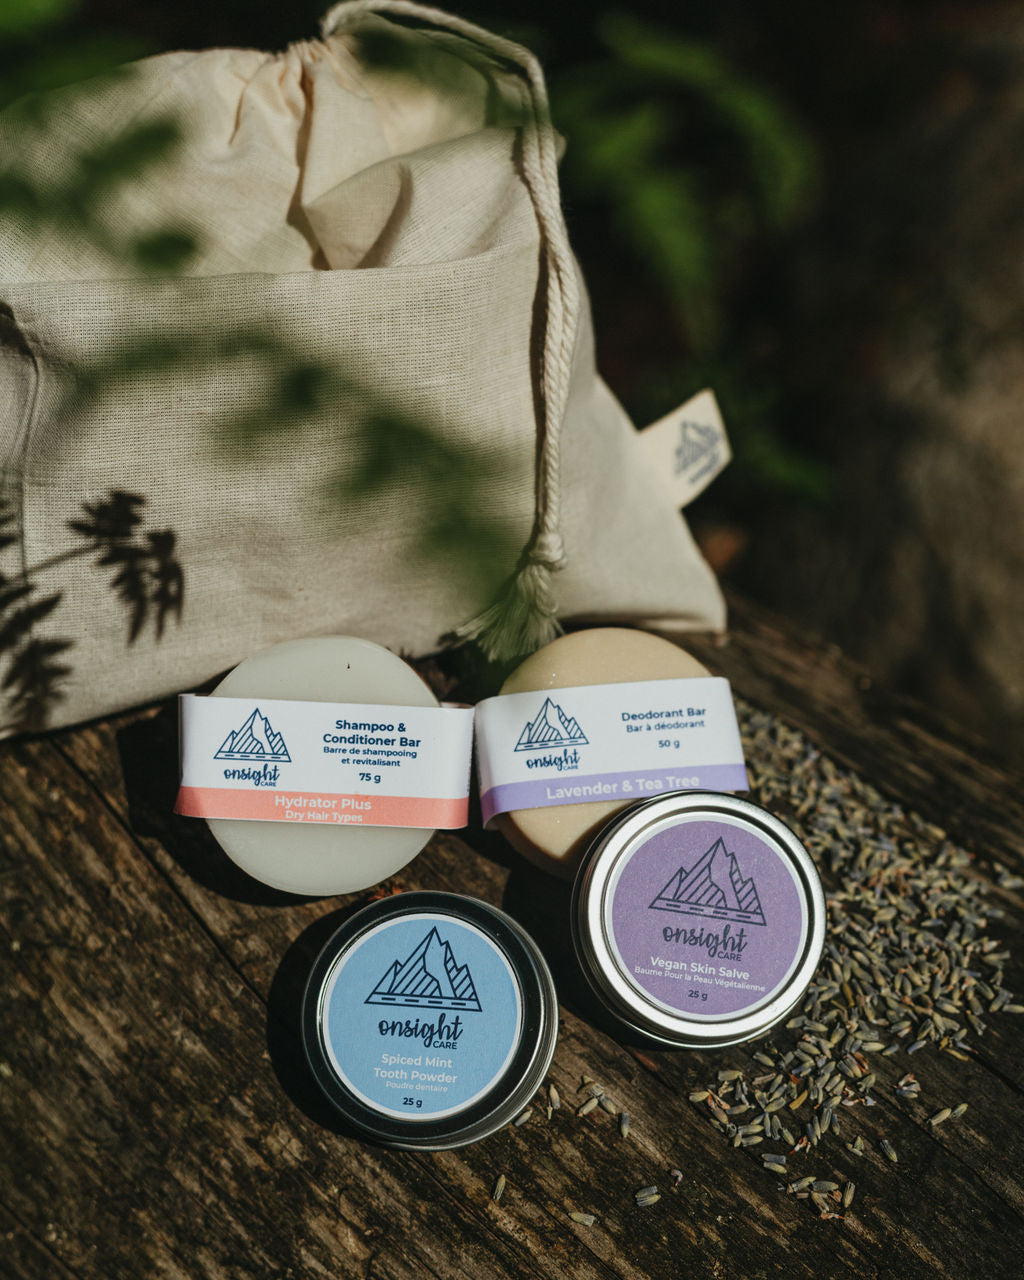 white cotton bulk bag sitting on log with shampoo & conditioner bar, deodorant bar, tooth powder, and skin salve leaning against. Leaves and lavender spilling over products.